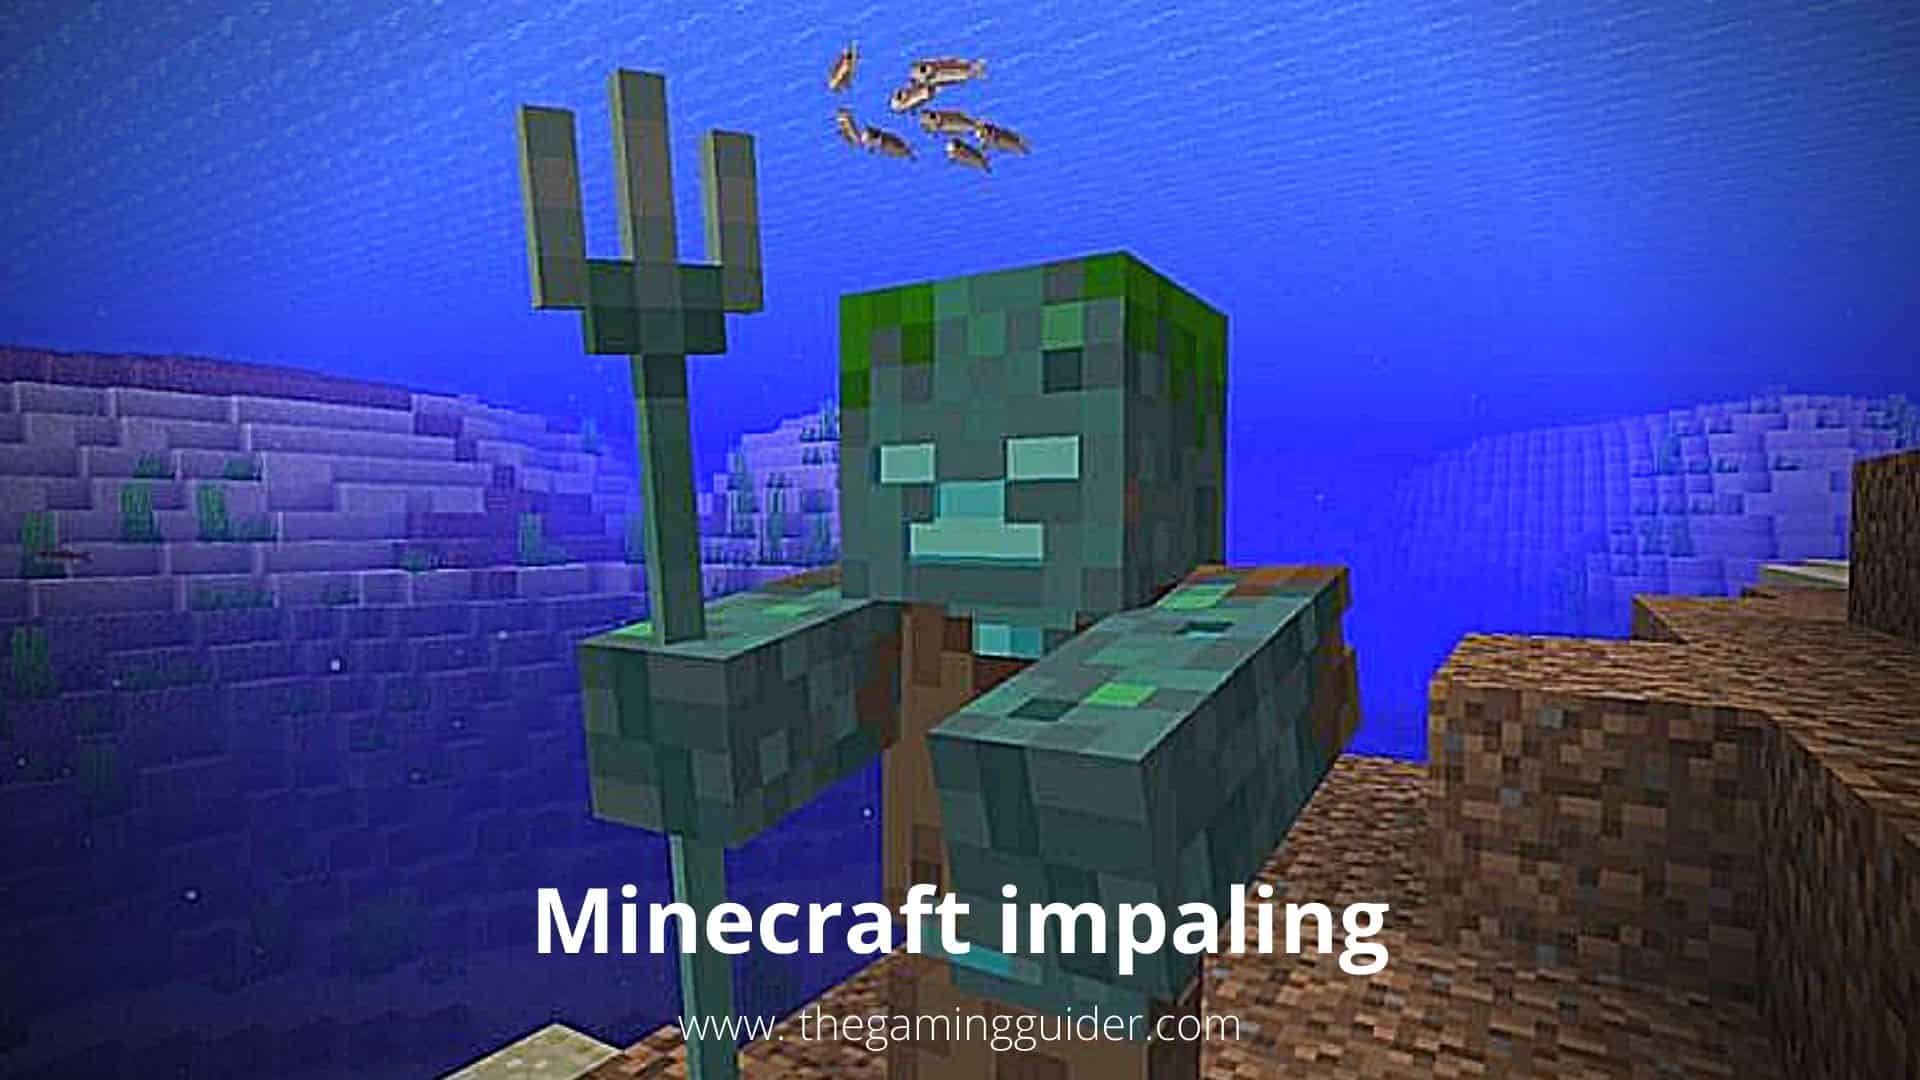 Minecraft impaling - the gamingguider